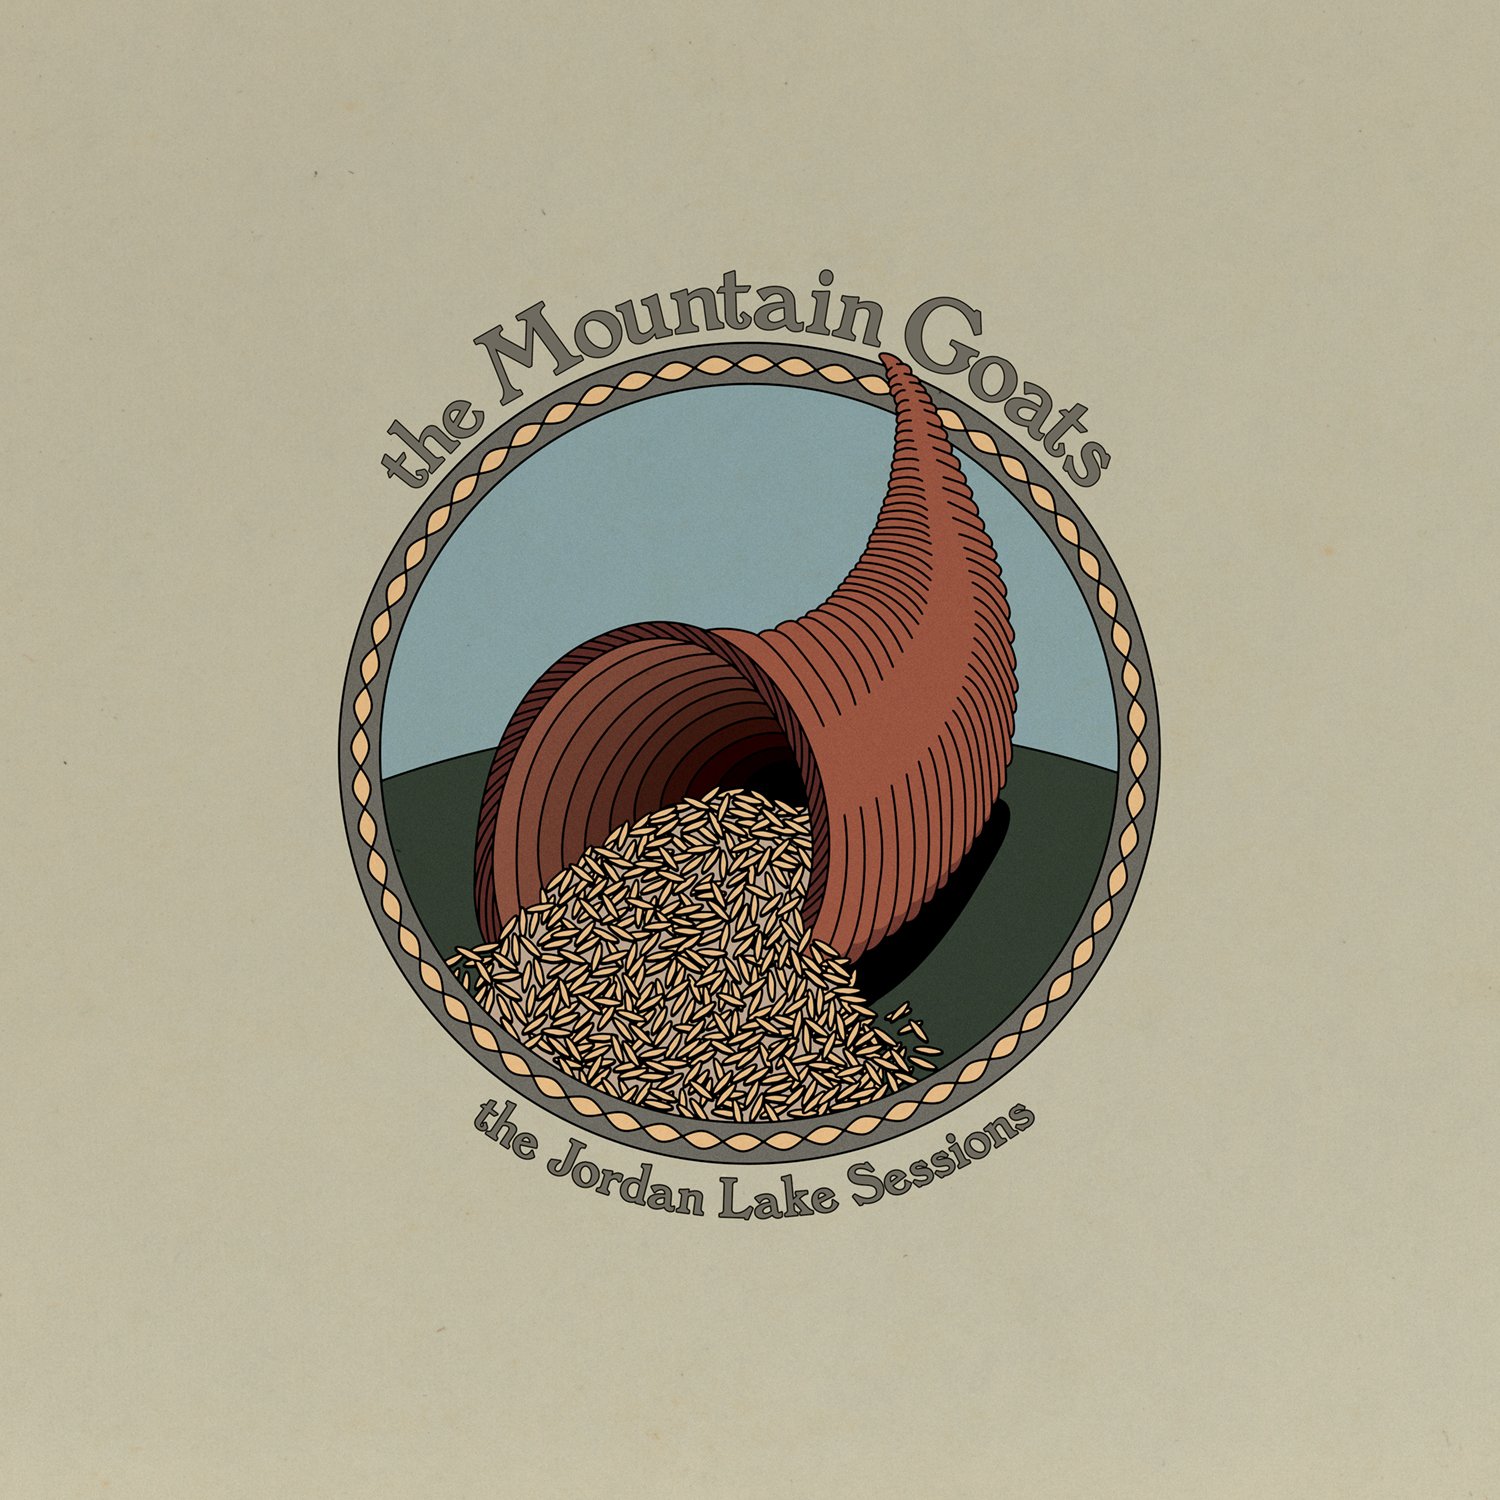 769_themountaingoats_thejordanlakesessions1and2_1500.jpg